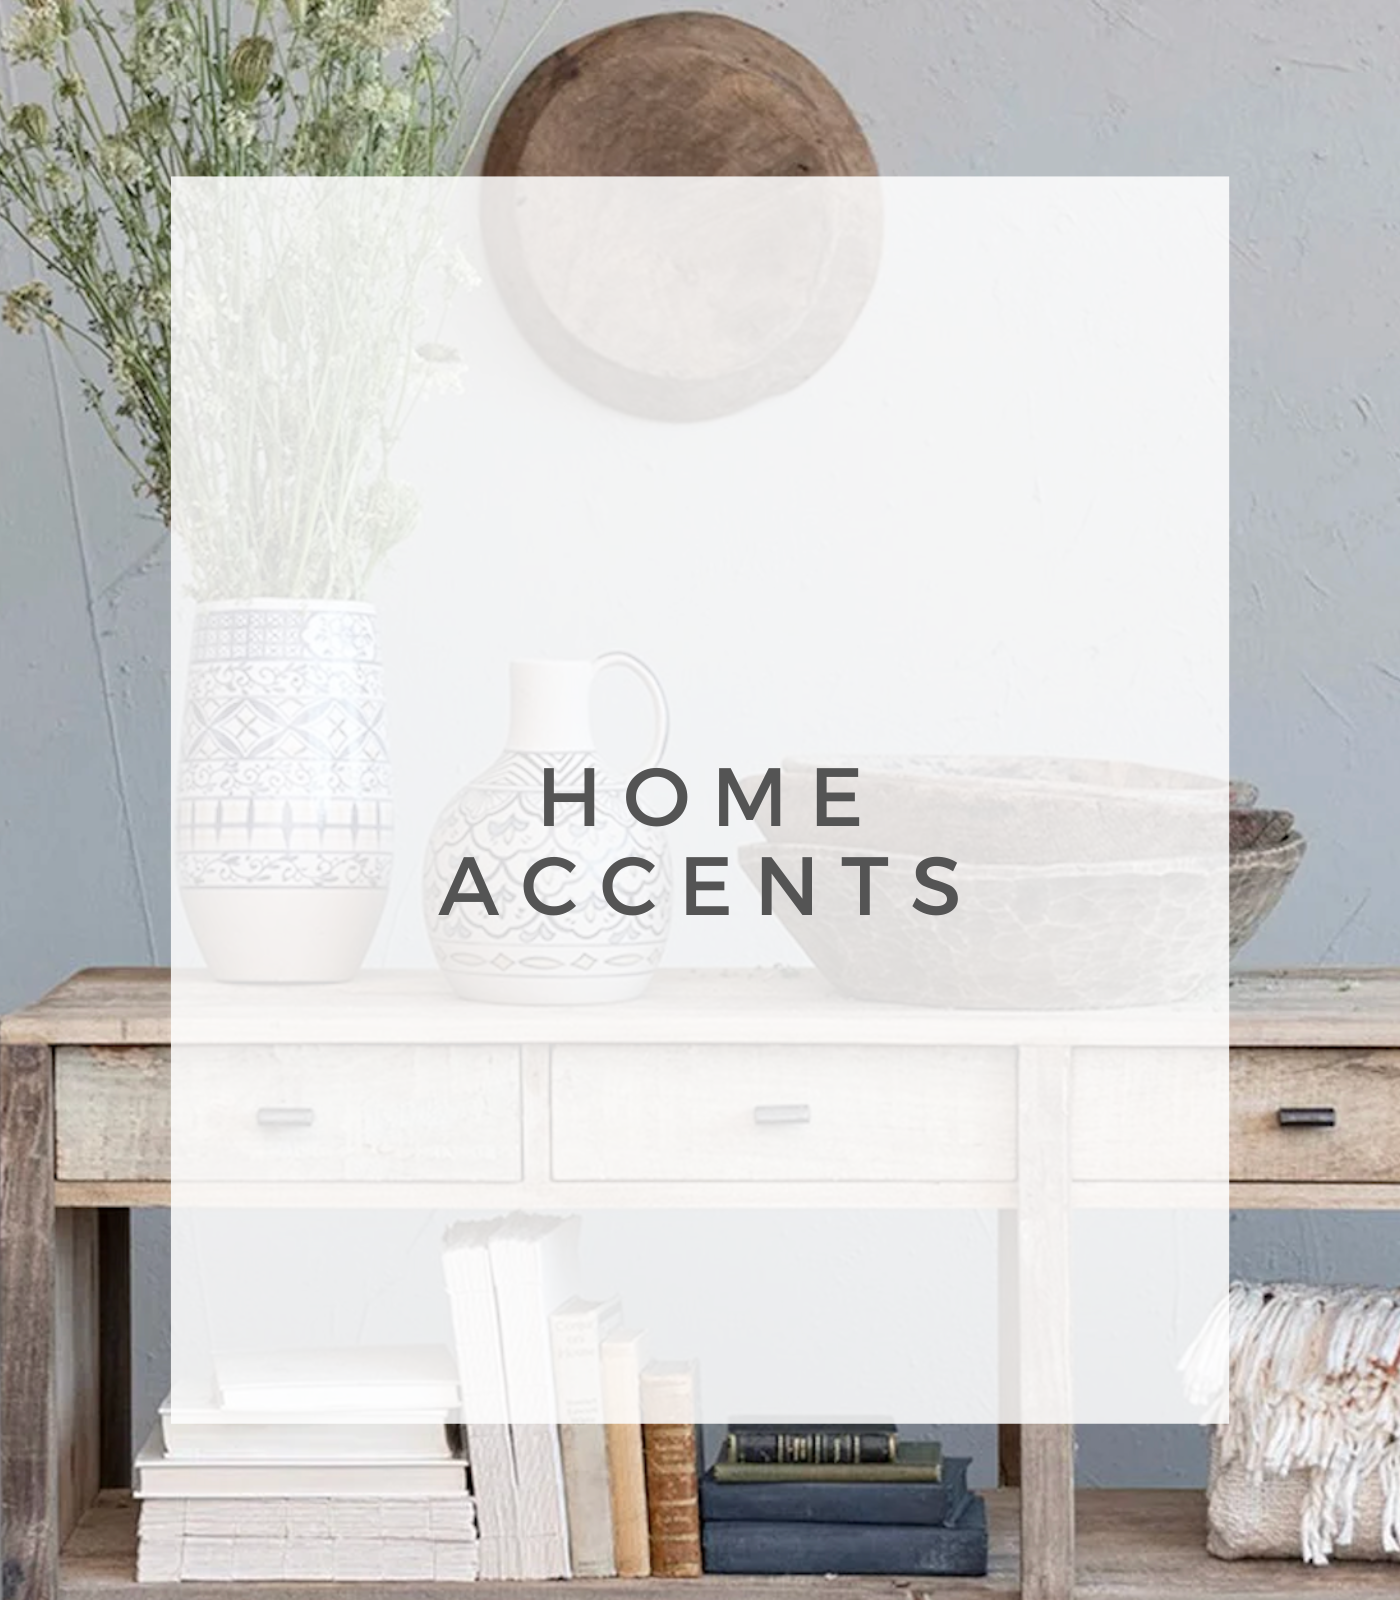 HOME ACCENTS